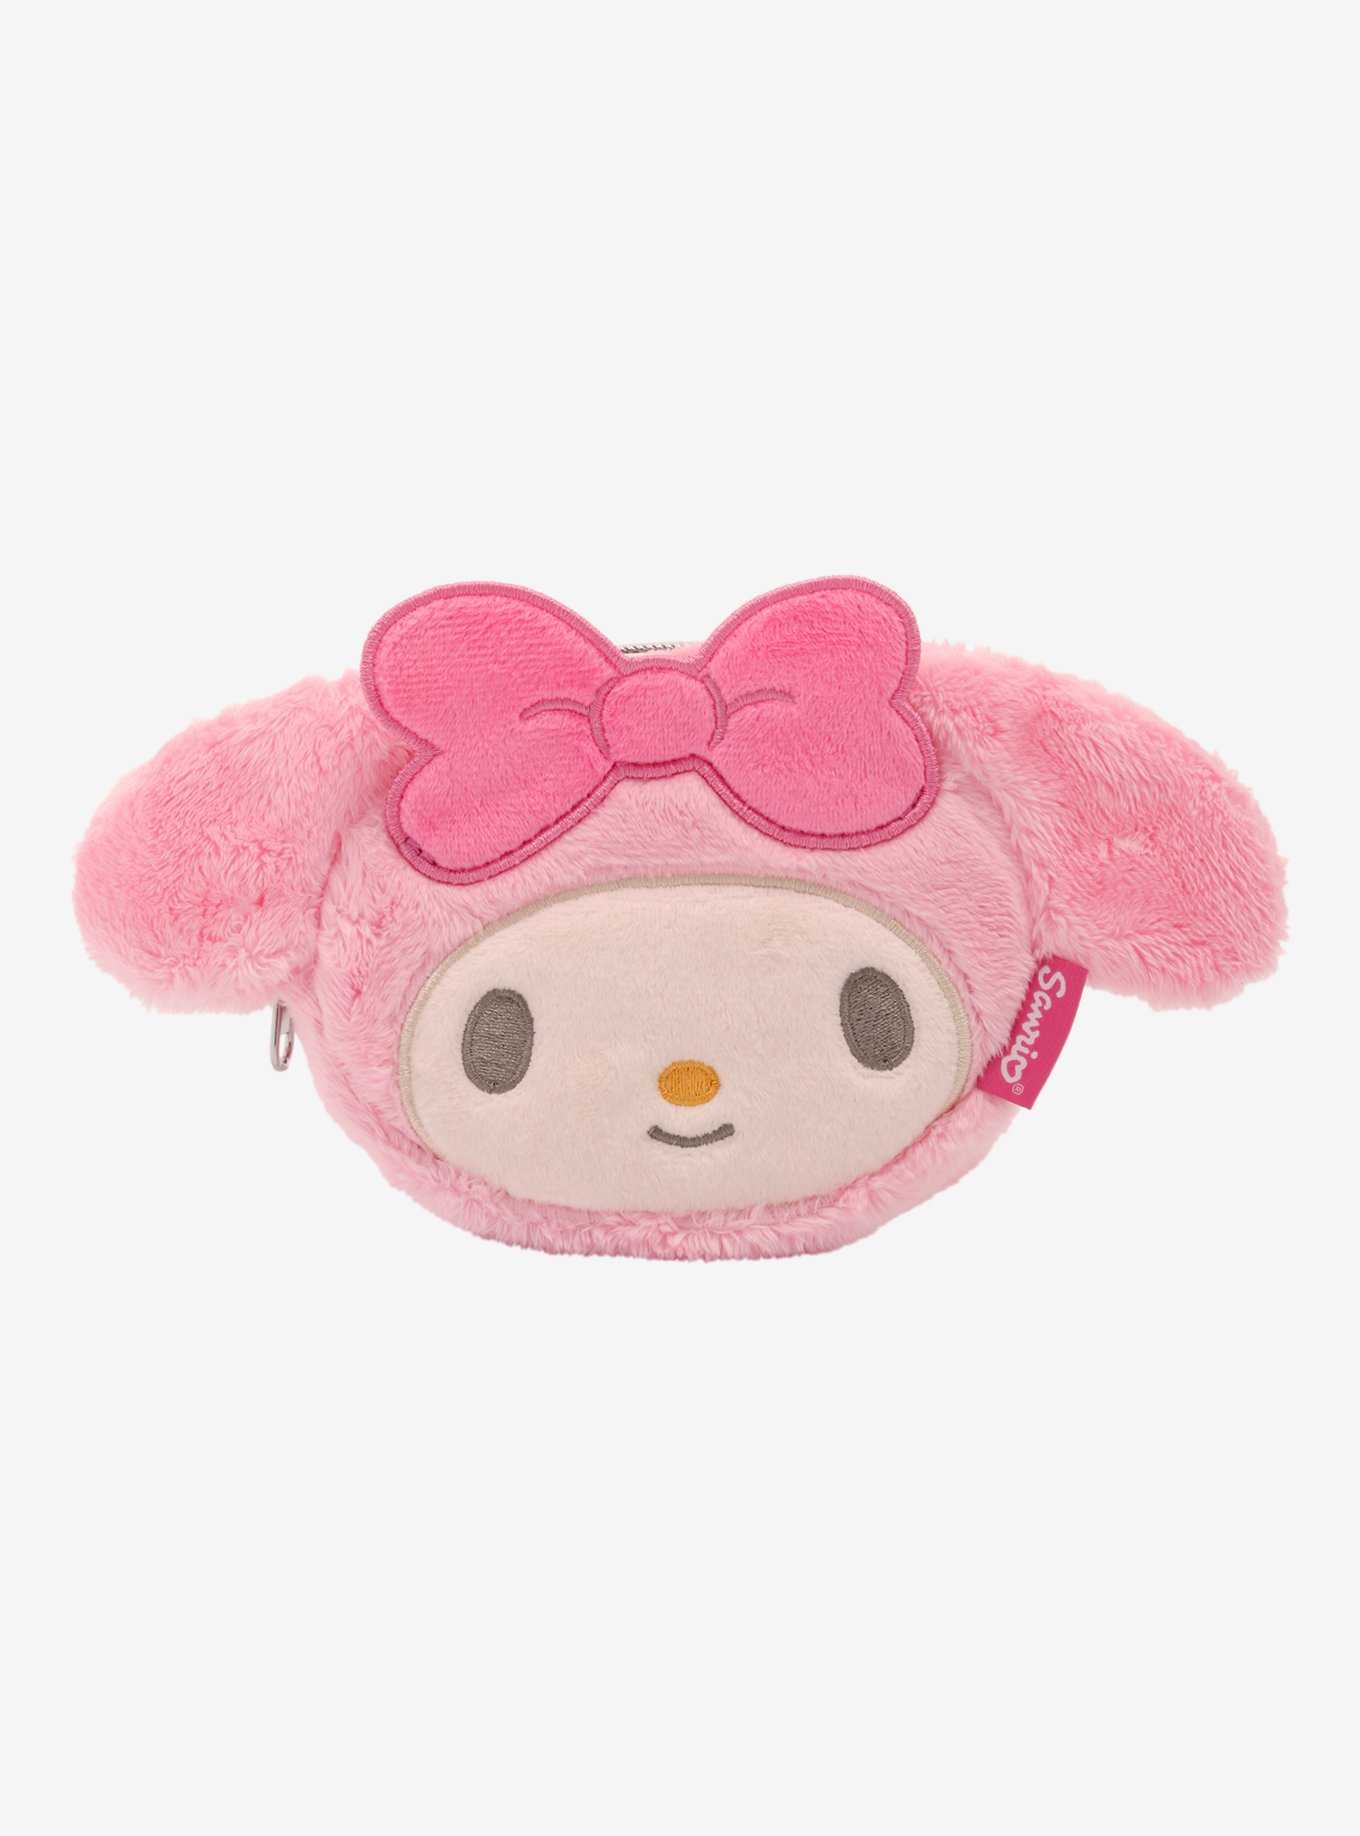 Loungefly My Melody Fuzzy Figural Coin Purse, , hi-res